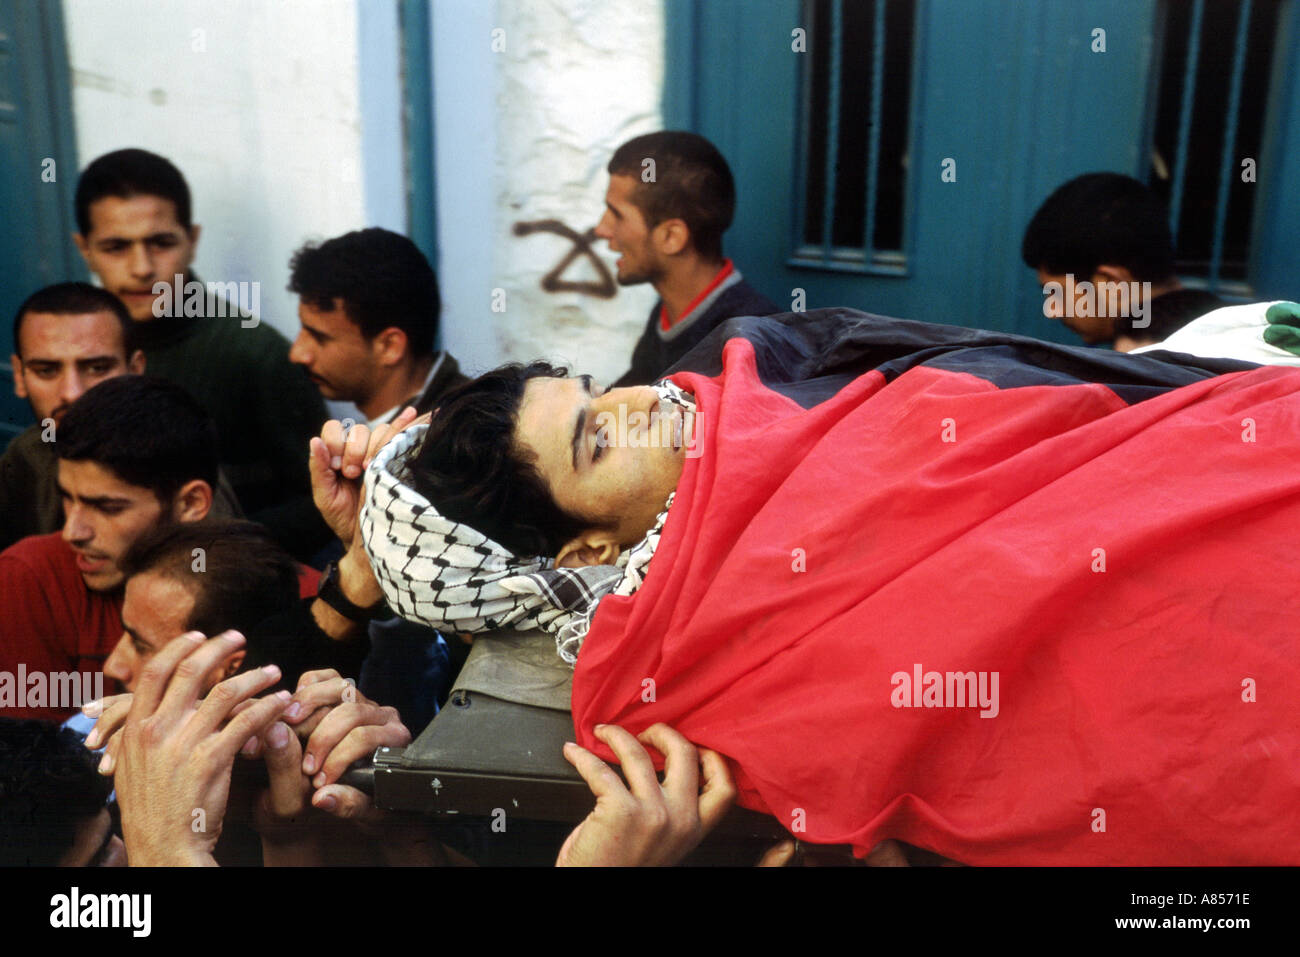 The funeral of a teen shot by Israeli soldiers Nablus November 2002  Stock Photo